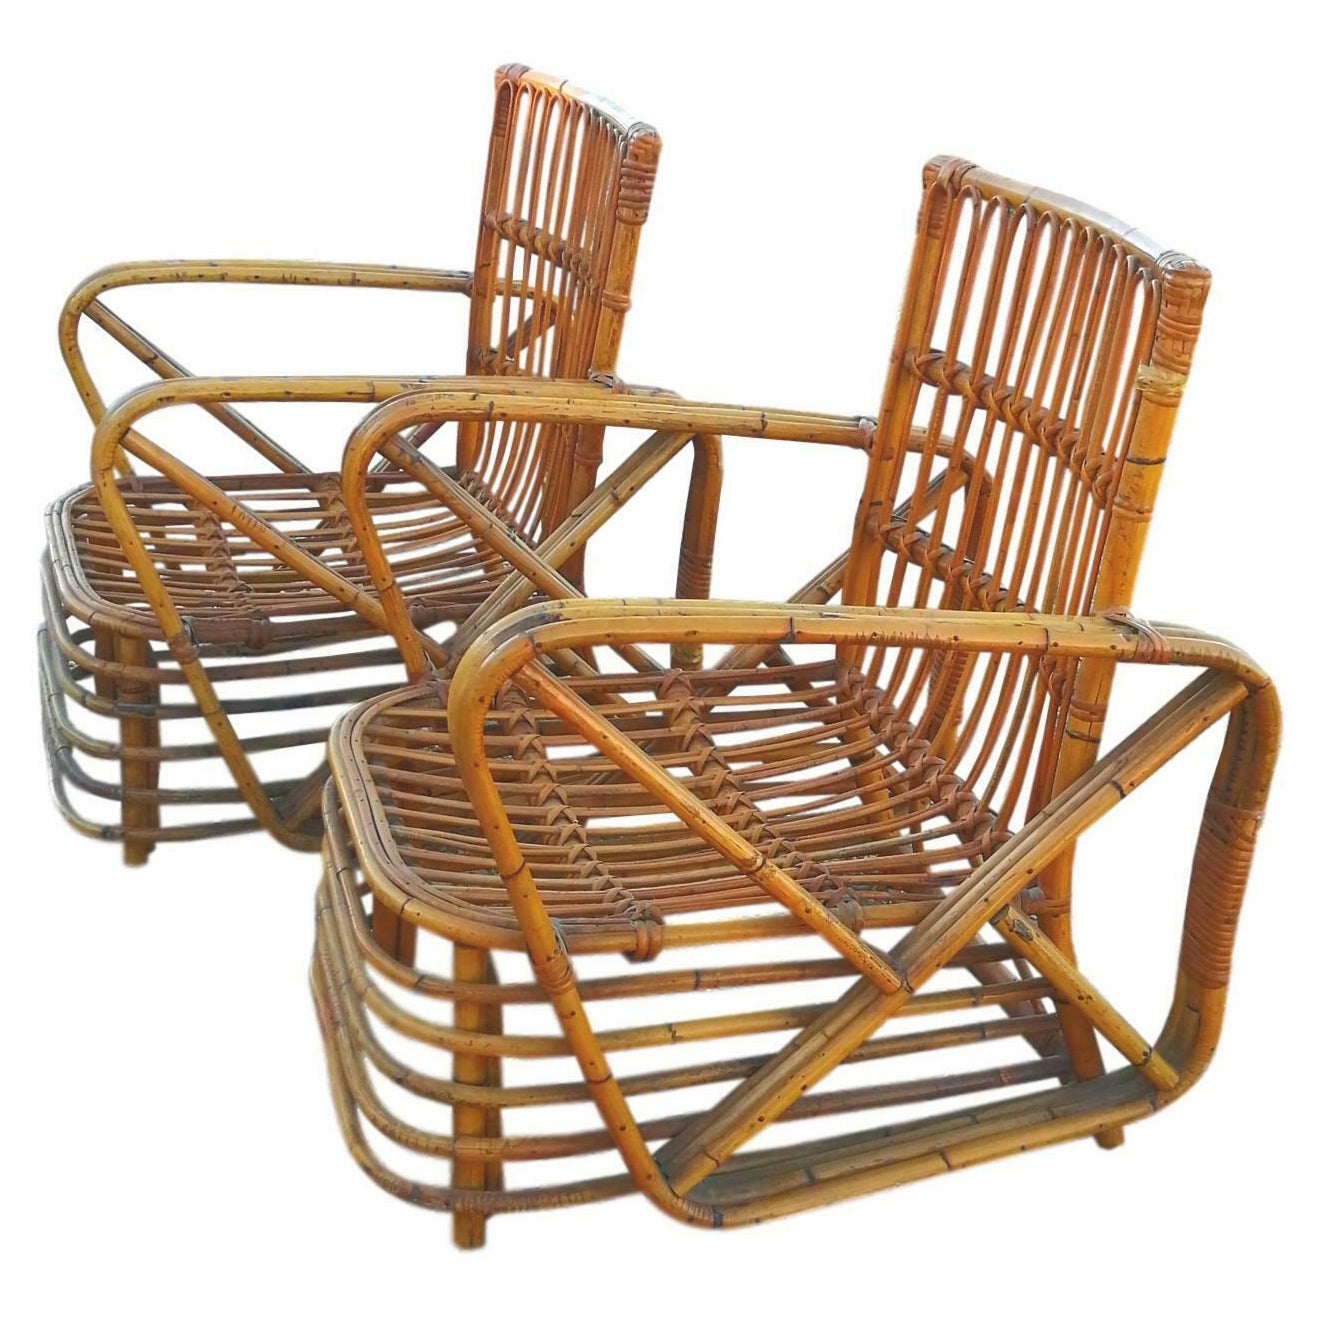 Pair of Armchairs + Table in Rattan Bamboo Design Paul Frankl, 1940s